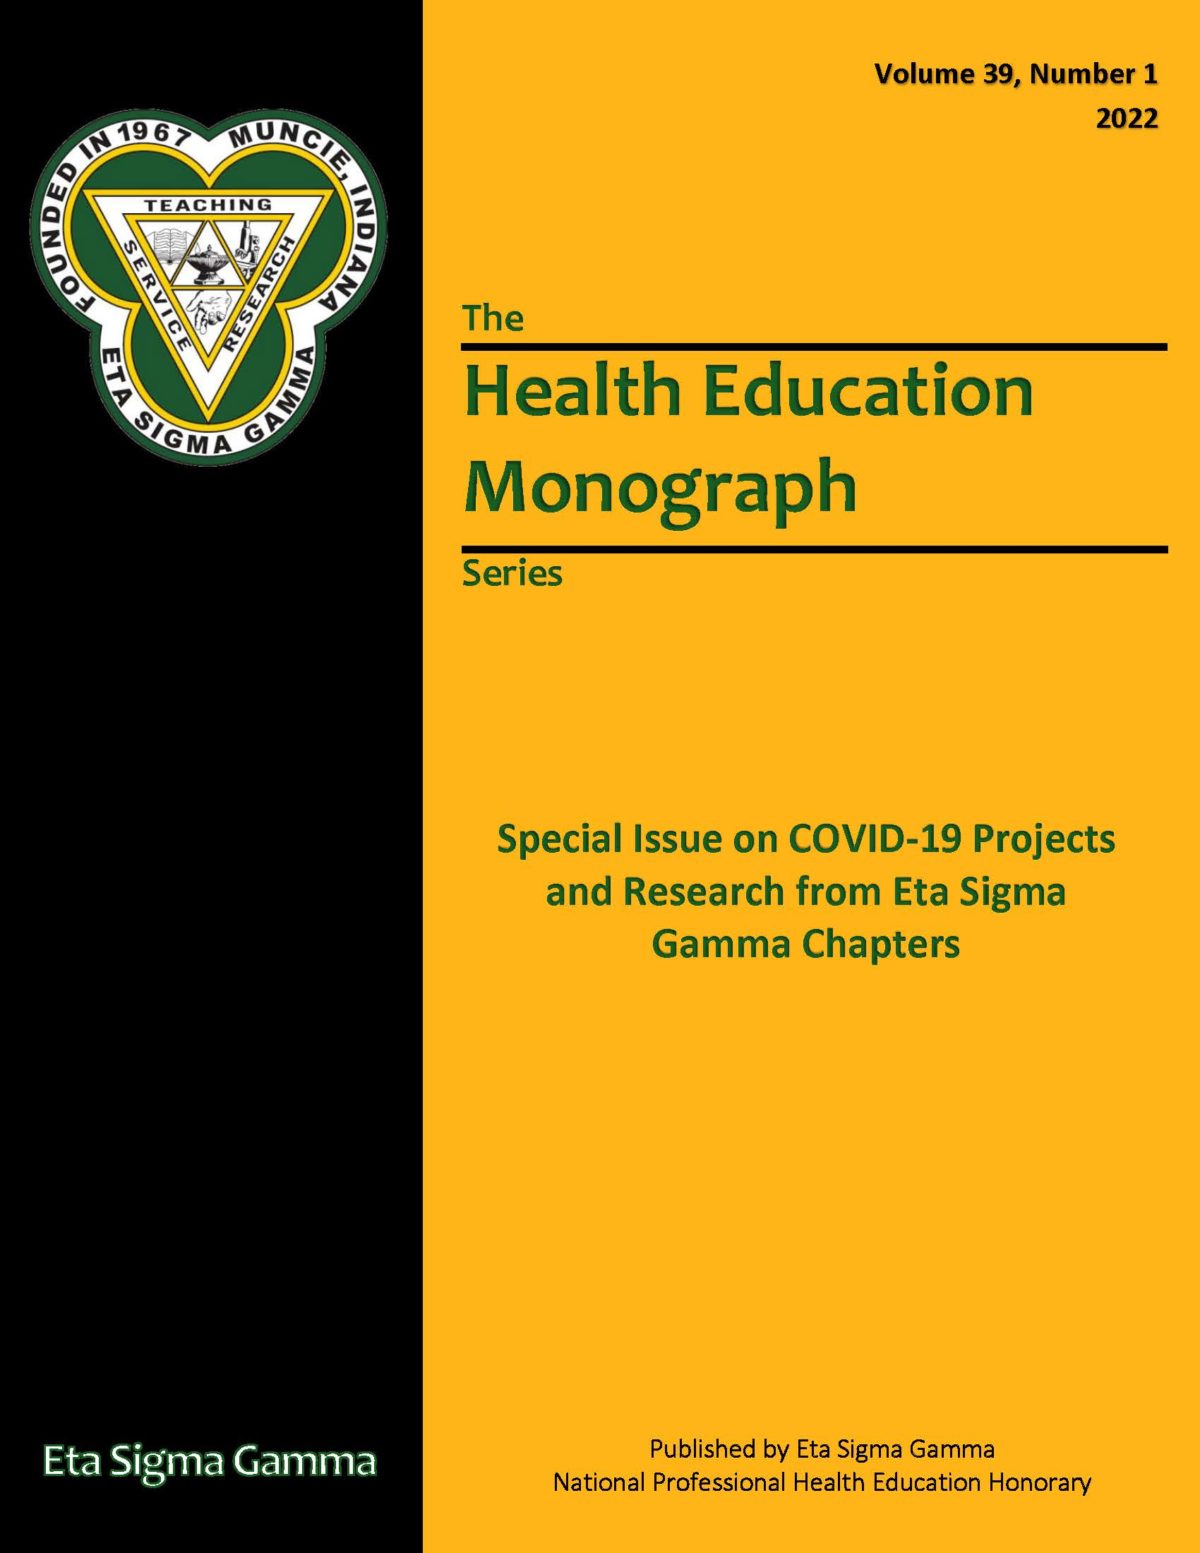 The Health Education Monograph Special Issue on COVID-19